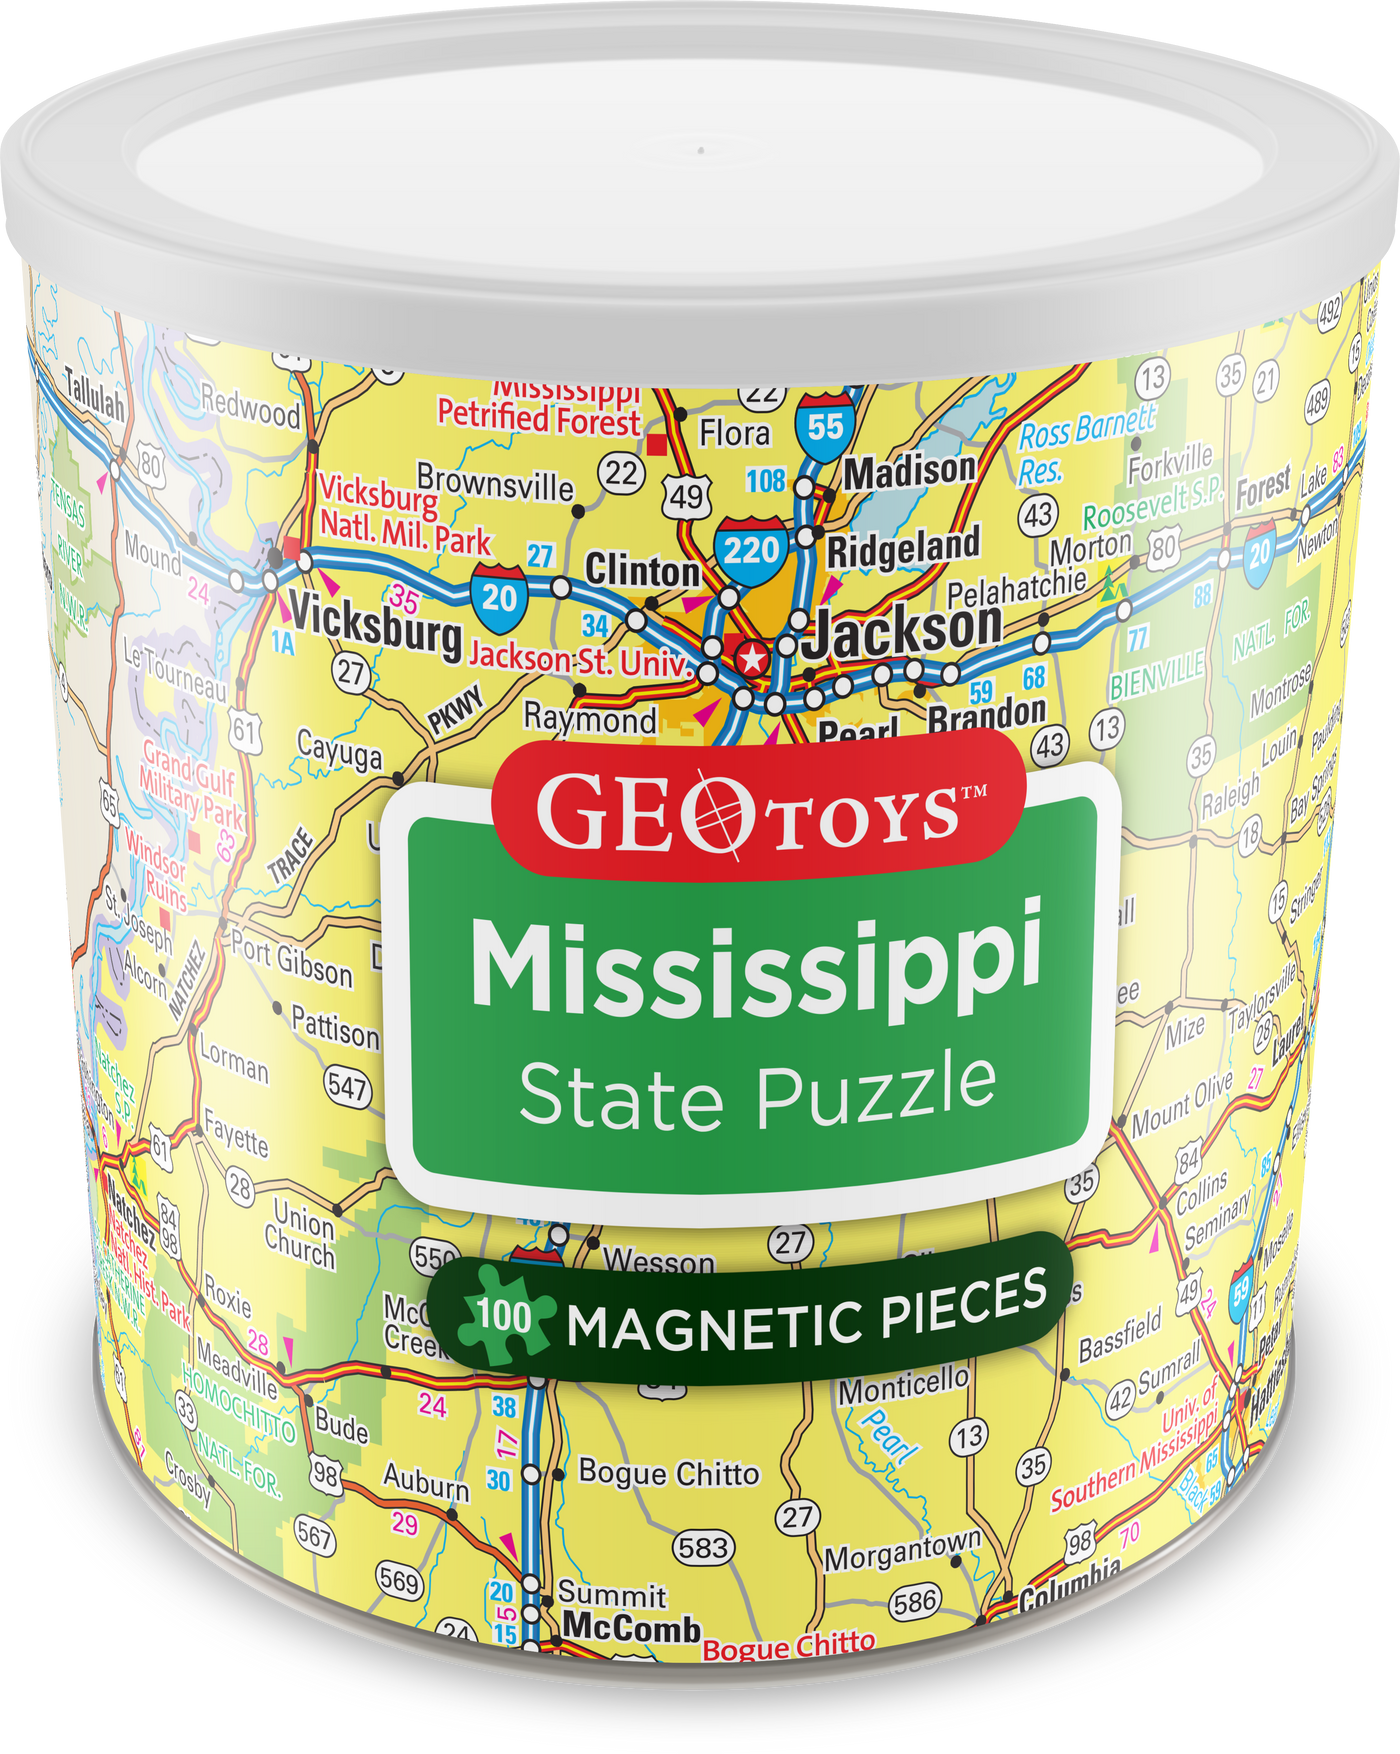 100 Piece Magnetic Puzzle - Mississippi